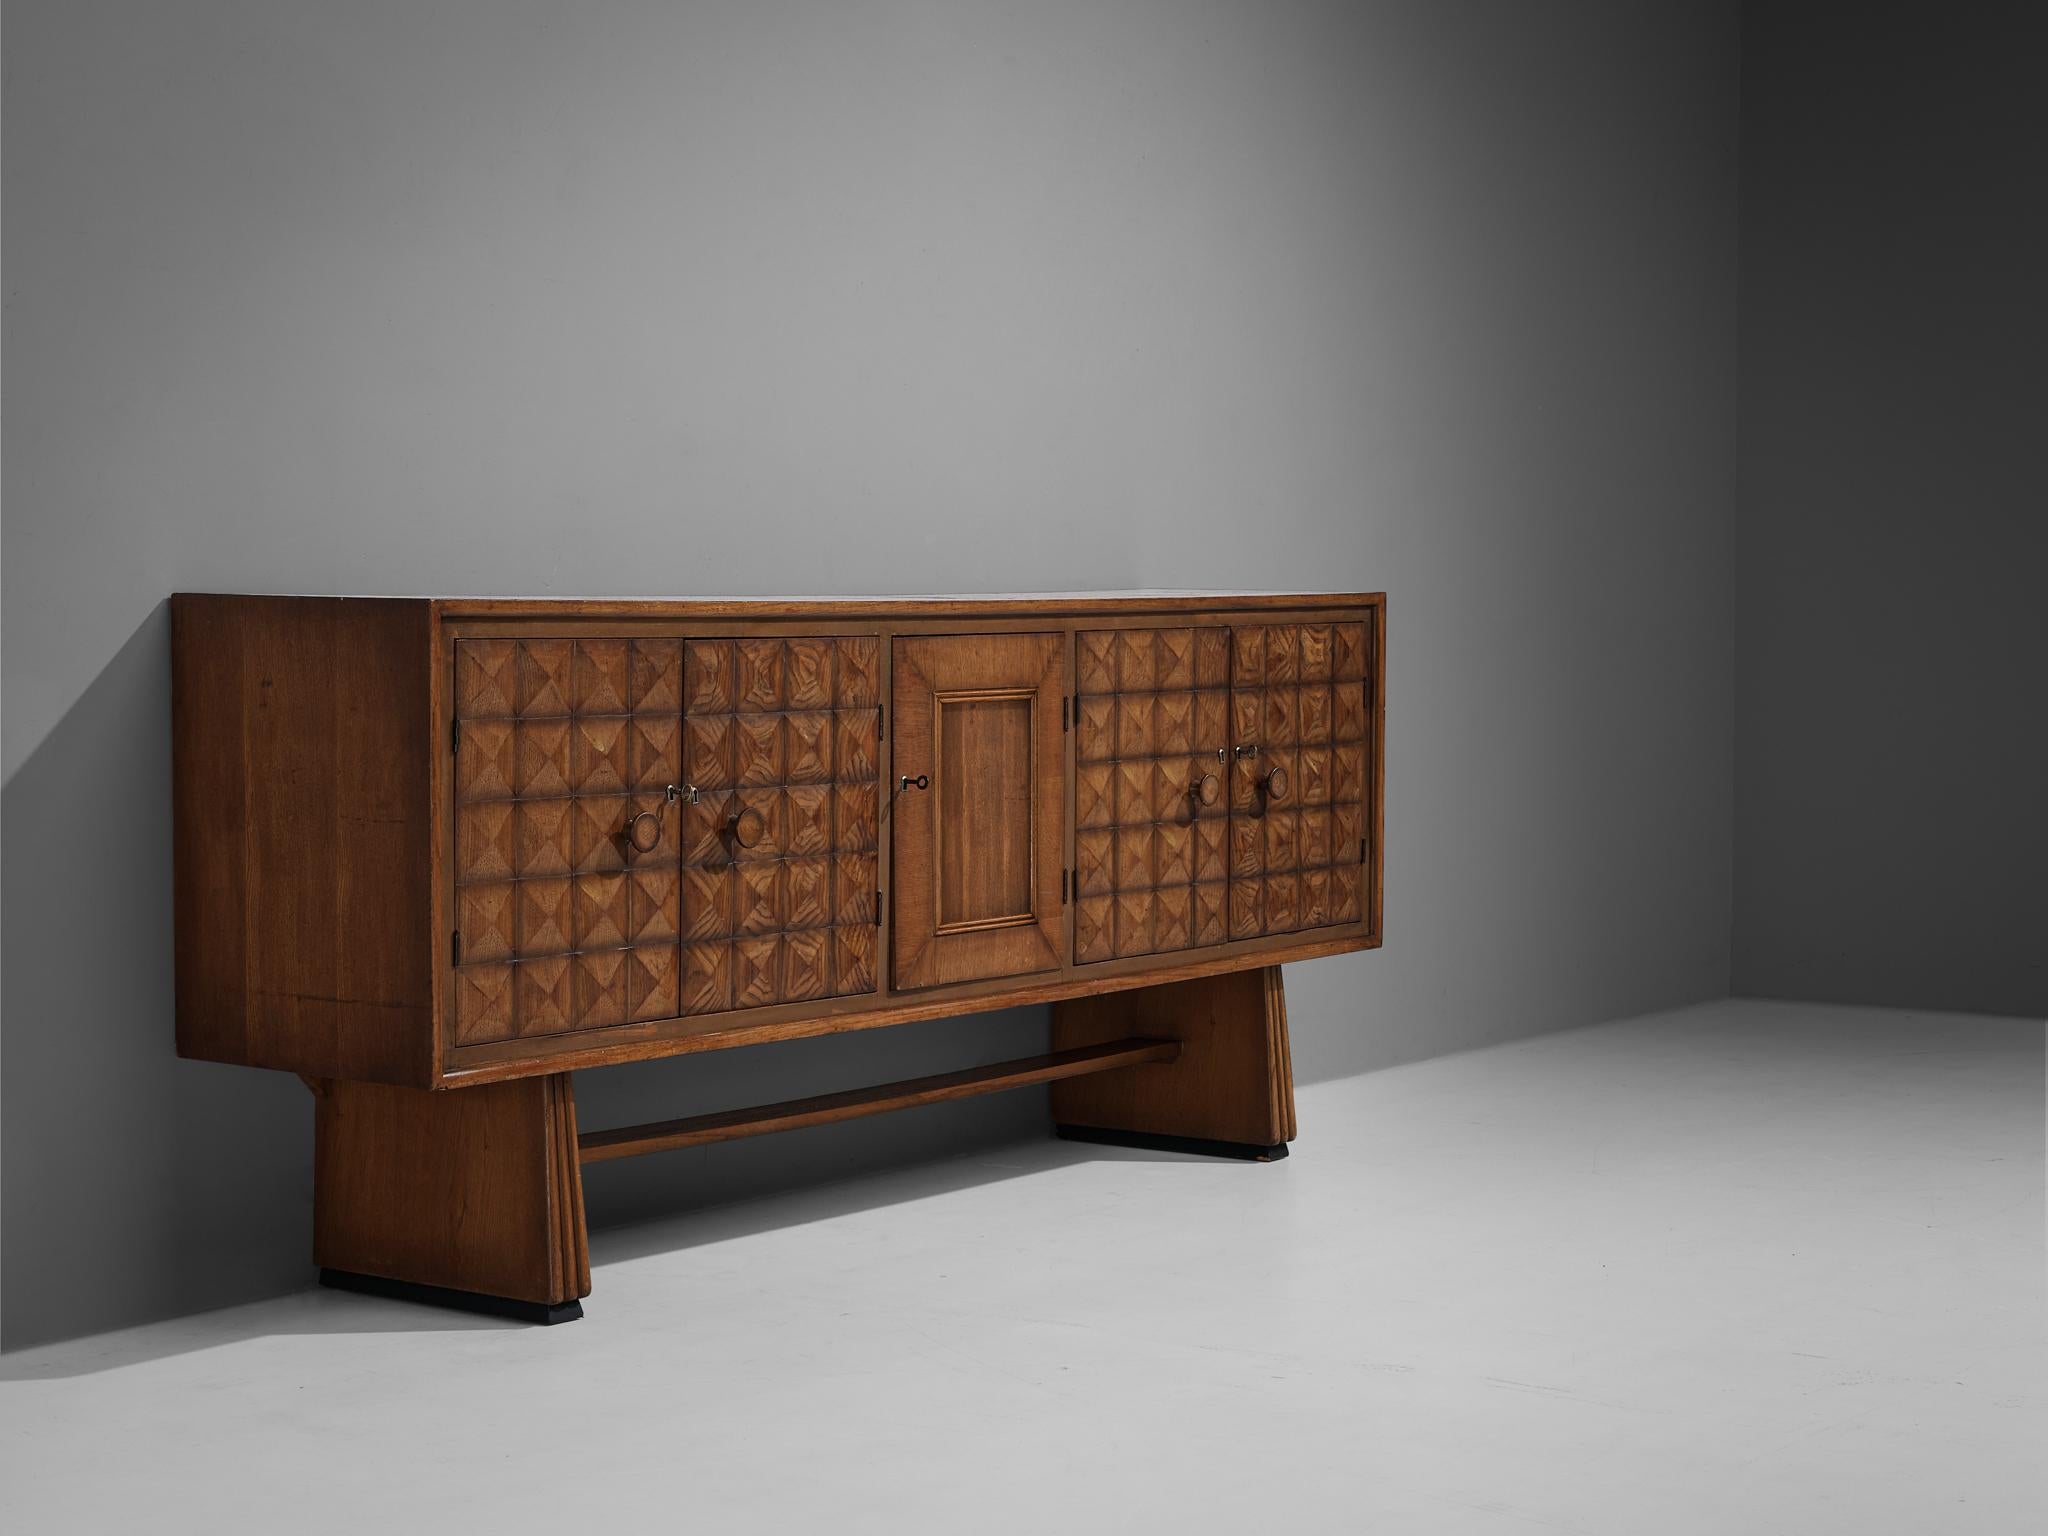 Sideboard, oak, metal, Italy, 1950s

This charming sideboard of Italian origin is beautifully constructed. Craftsmanship is combined with a well-balanced eye for the composition of functional and decorative elements. The front holds a beautiful